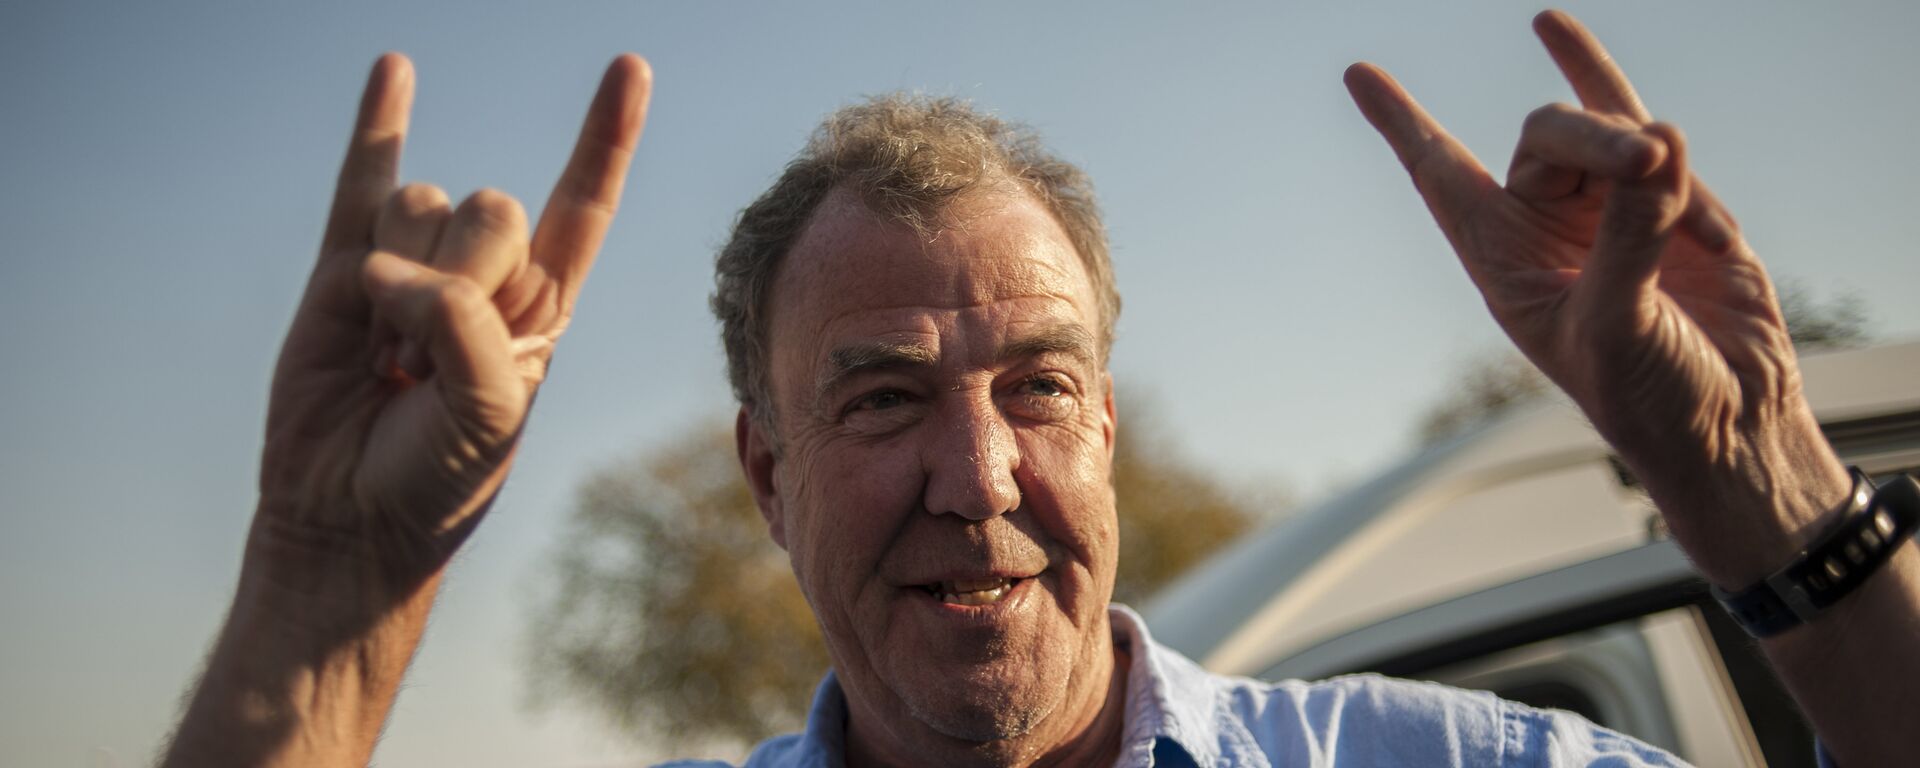 Former Top Gear presenter Jeremy Clarkson gestures as he arrives at the Ticketpro Dome for the Clarkson, Hammond and May Live Show held in Johannesburg on June 10, 2015 - Sputnik International, 1920, 21.12.2022